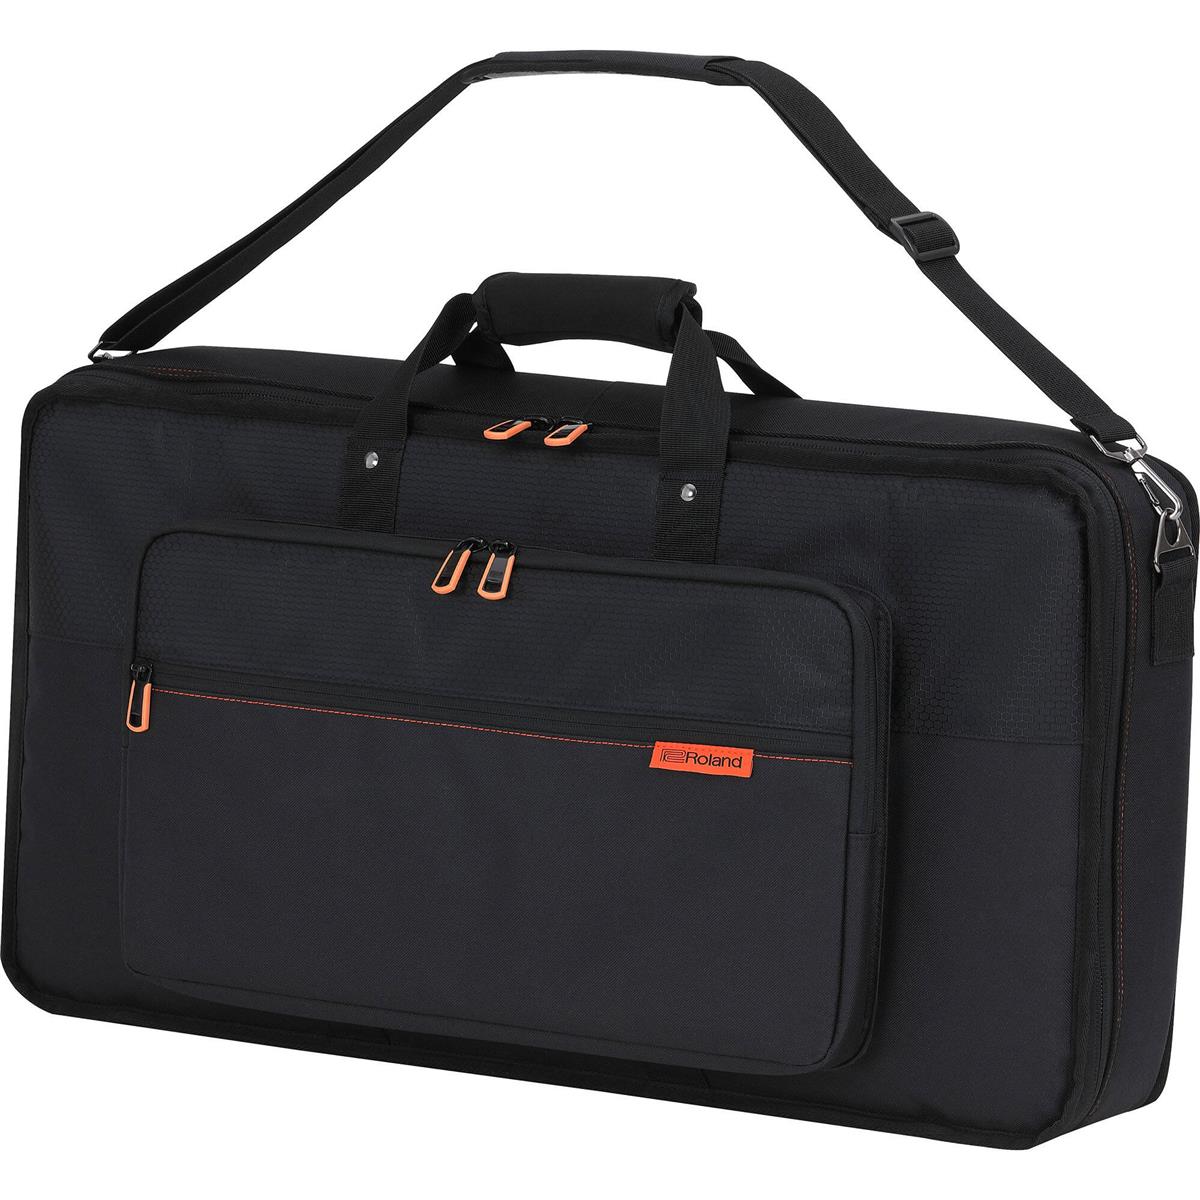 Image of Roland CB-B37 Carry Bag for GAIA 2 and JUPITER-Xm Synthesizers